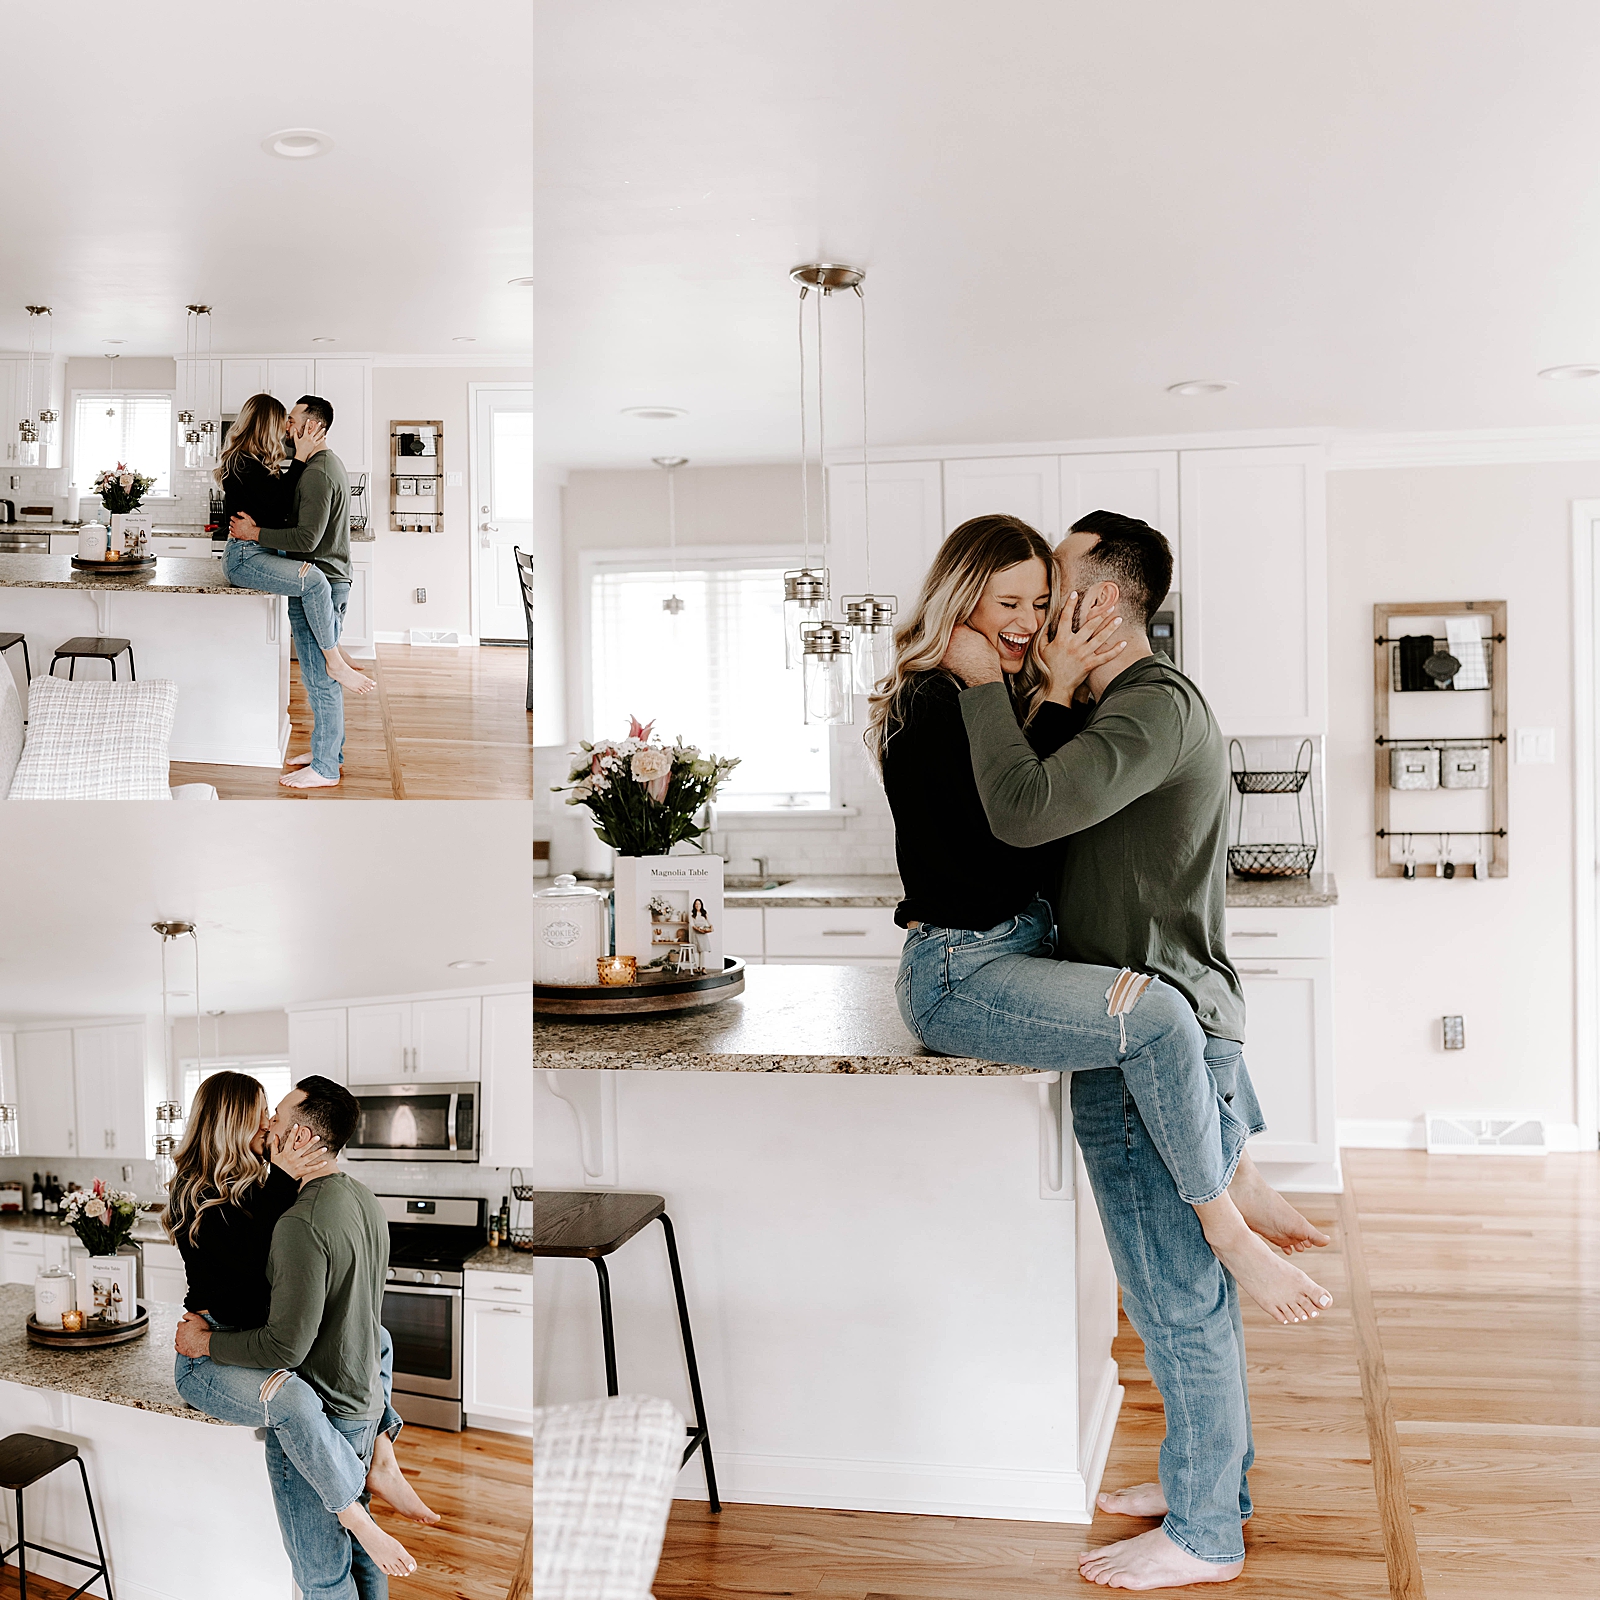 engagement photo ideas; at home engagement session